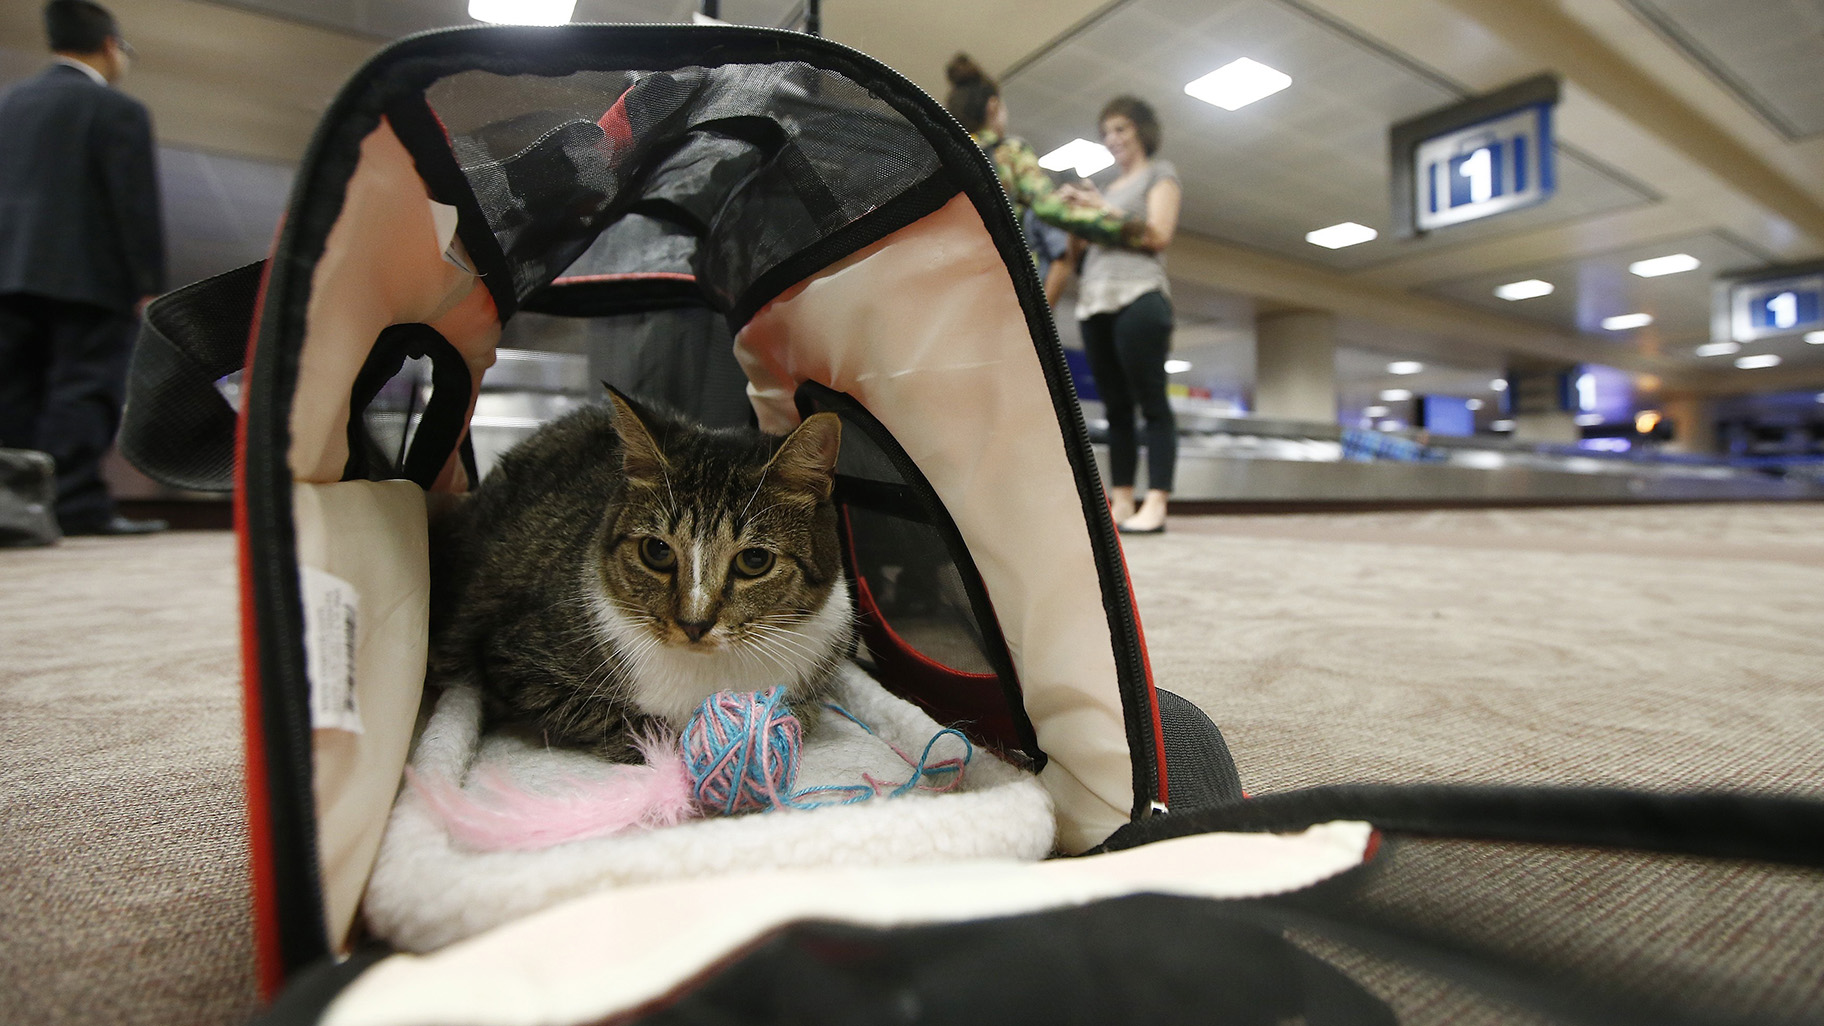 Us Seeks To Tighten Rules Covering Service Animals On Planes Chicago News Wttw